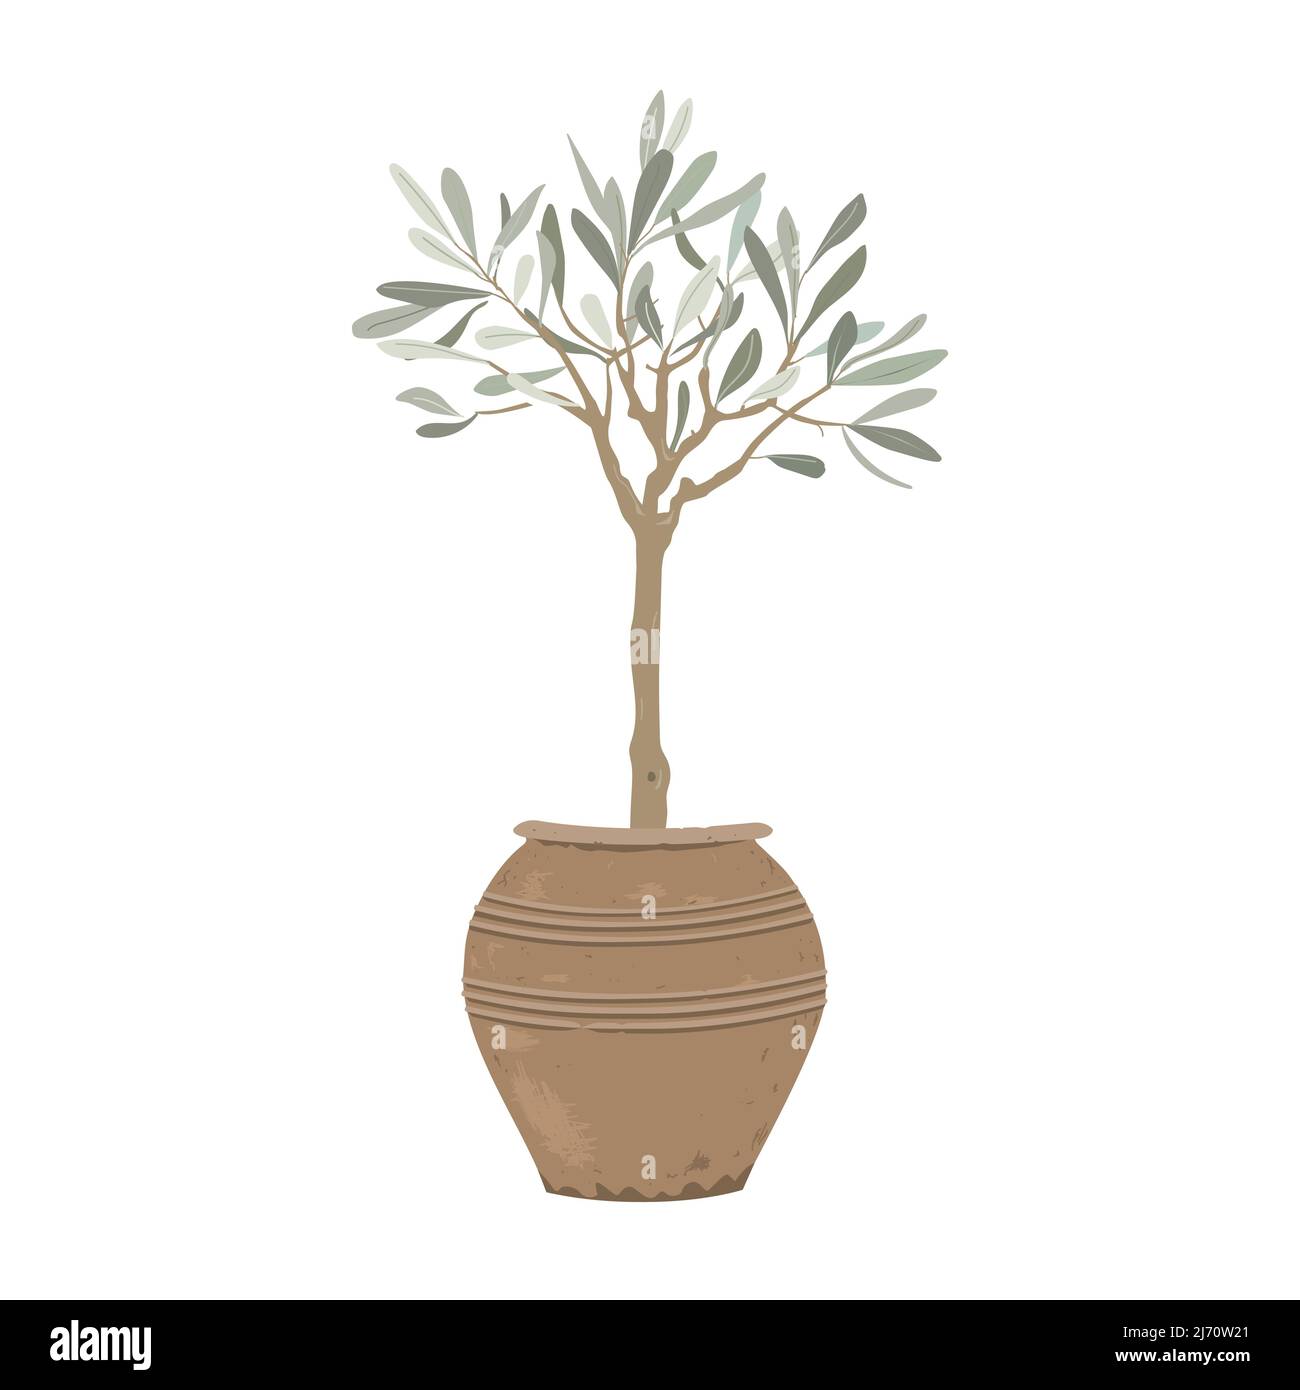 Olive tree in a stylish clay pot isolated on white background. Home plant decor element. Vector illustration Stock Vector